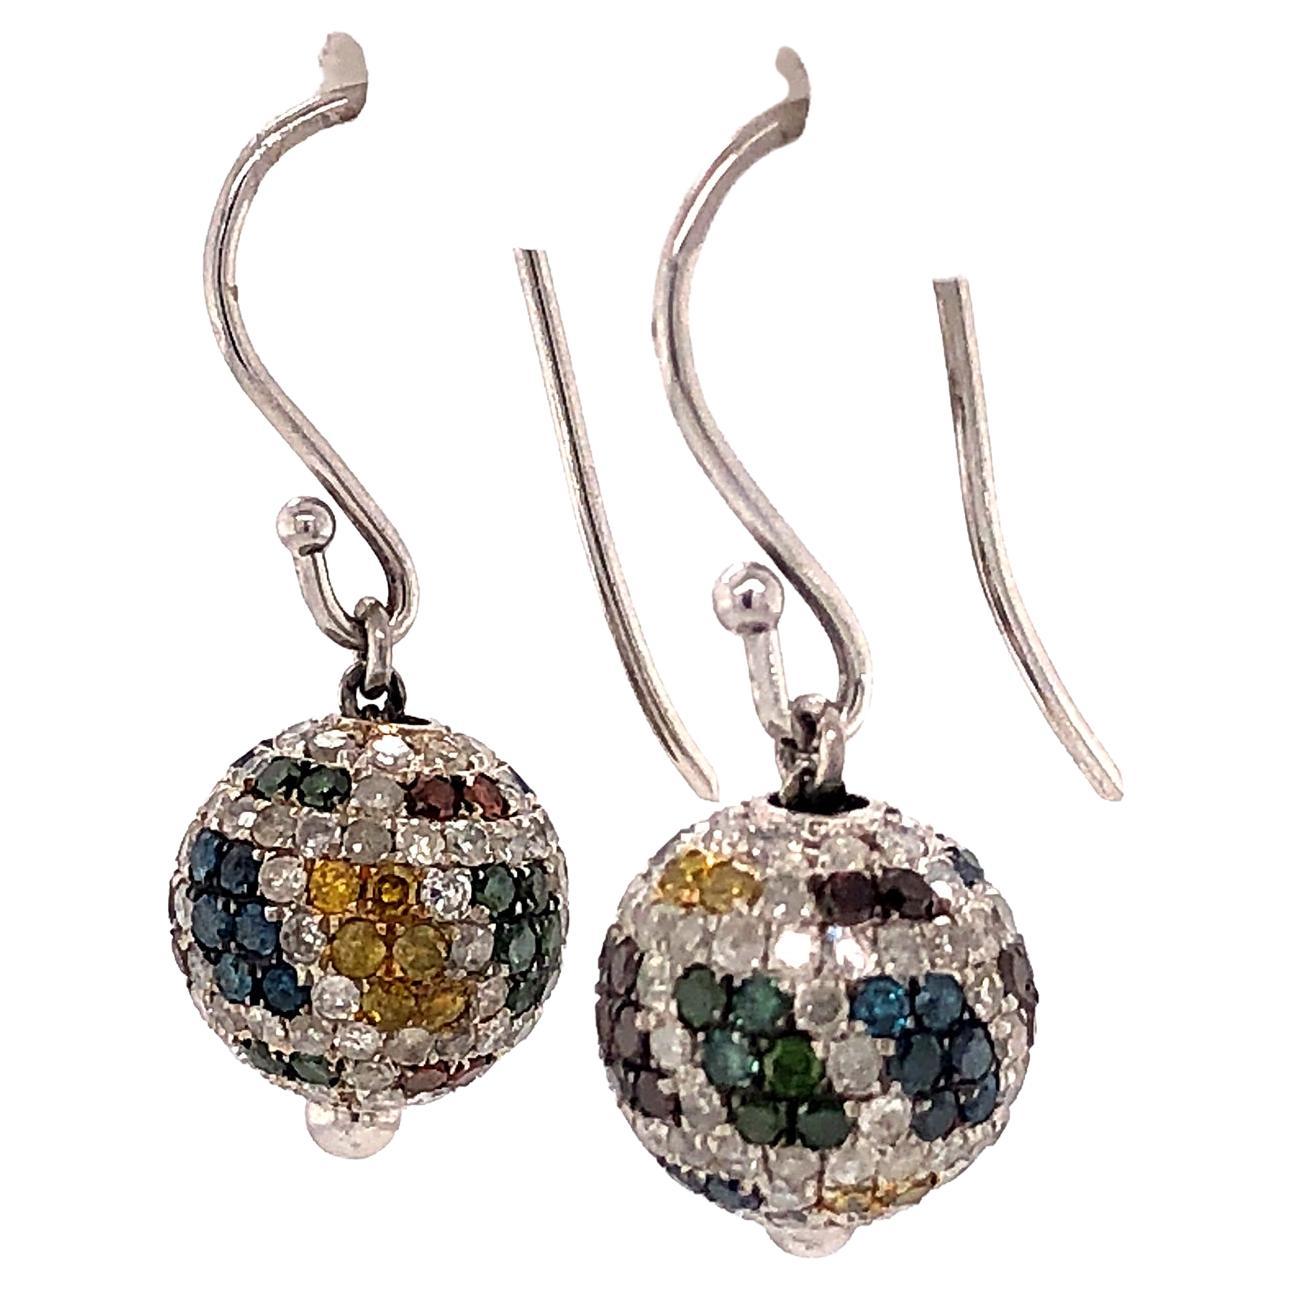 Ranibow Color Themed Pave Diamonds Ball Earrings Made In 14kt Gold & Silver For Sale